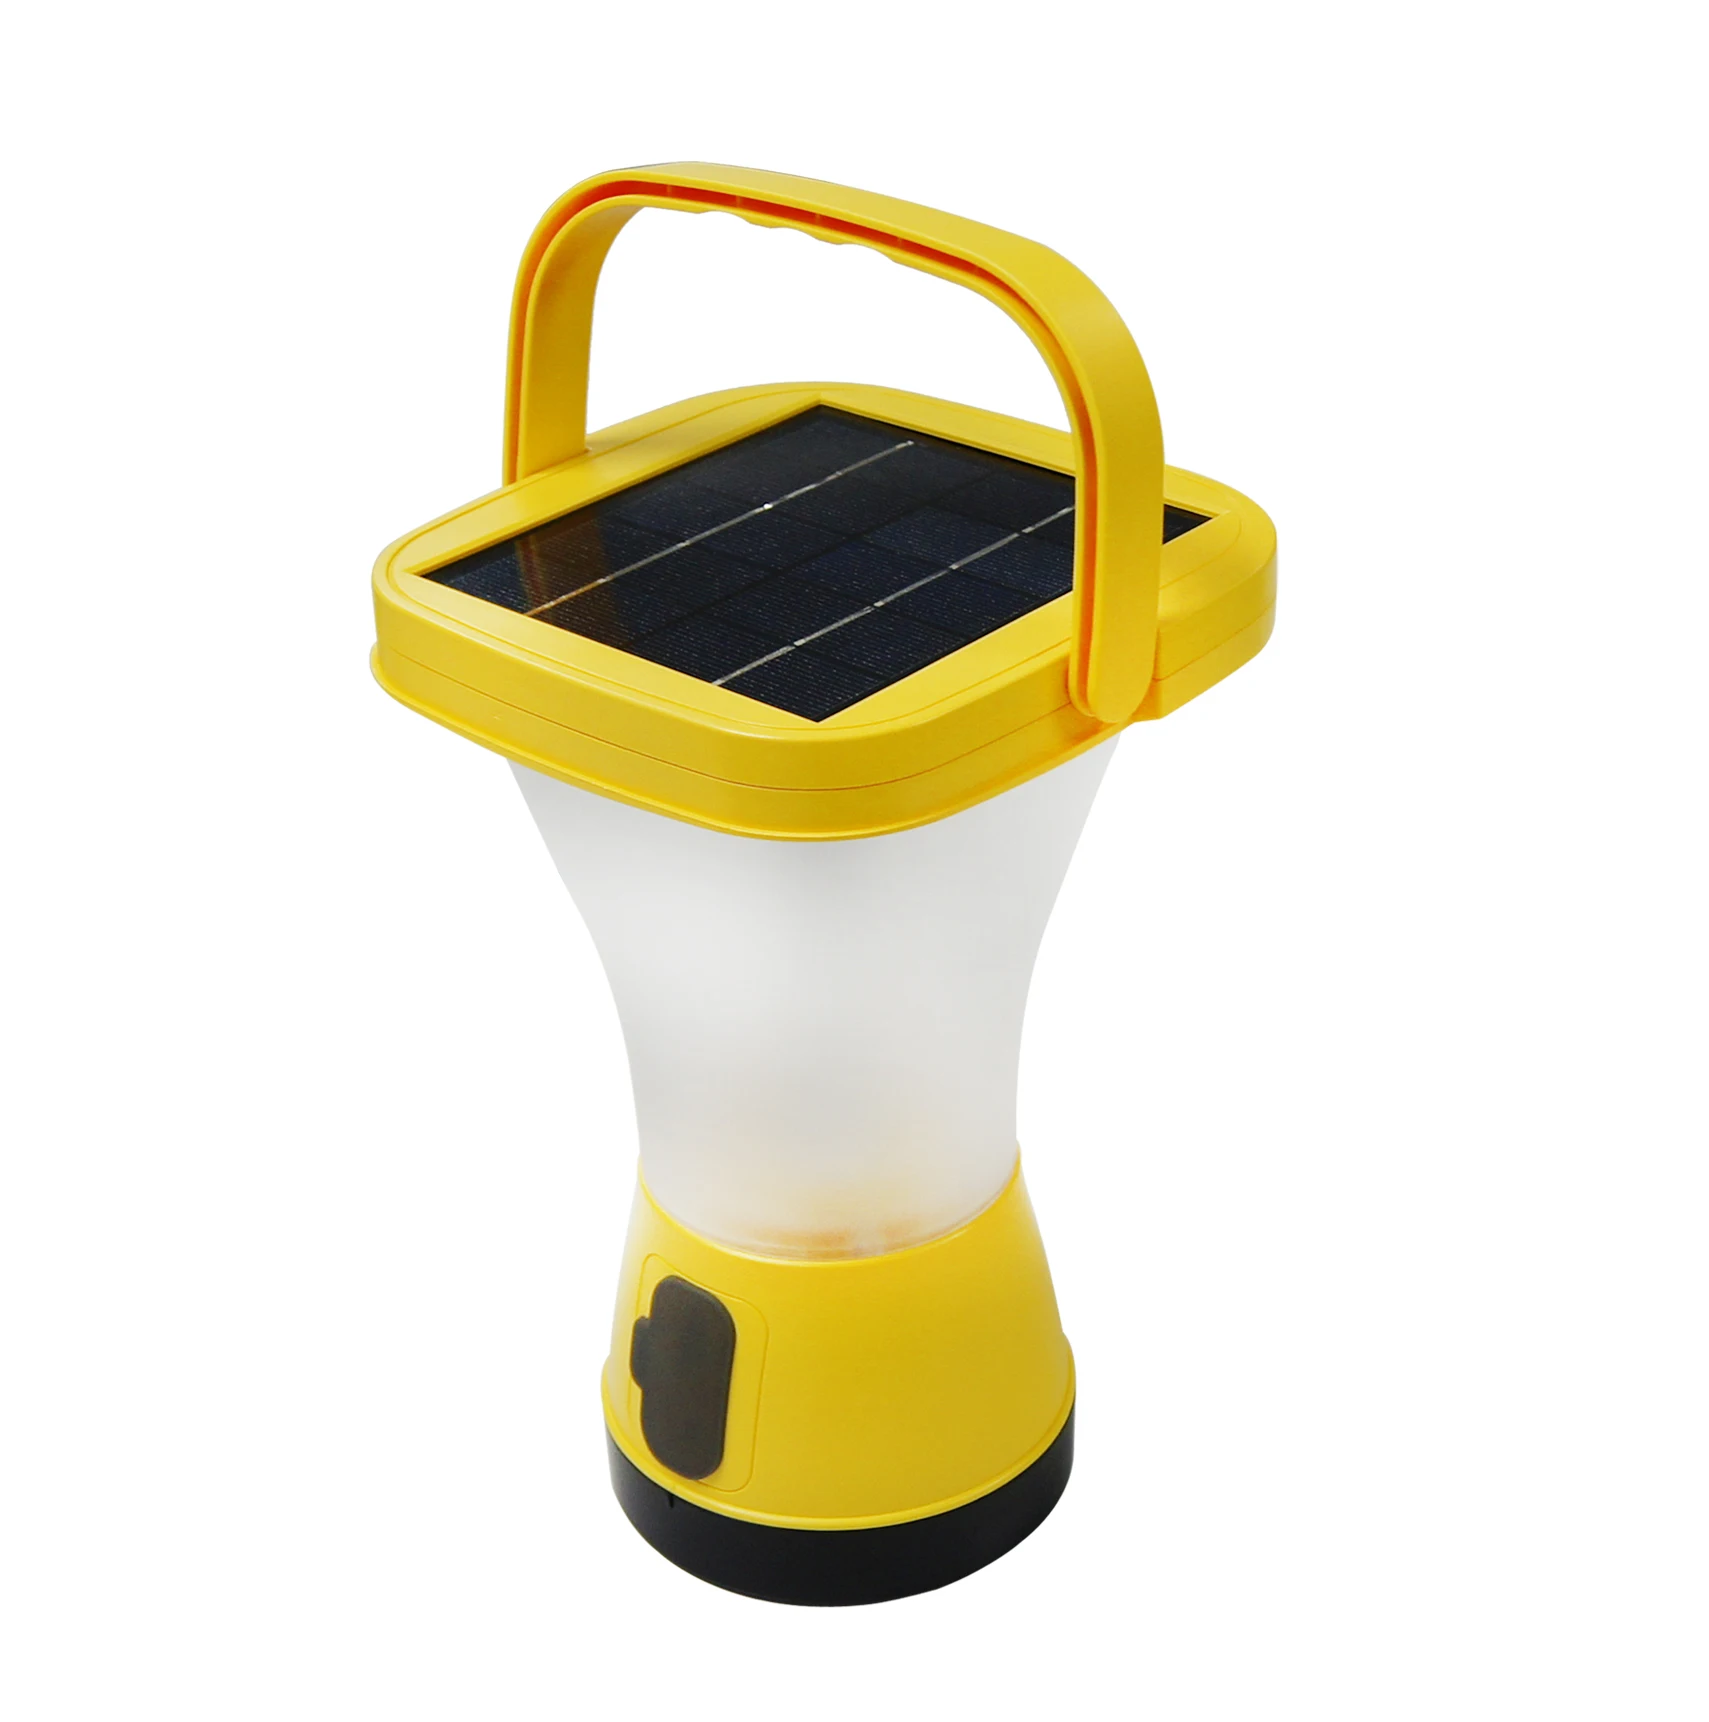 firefly portable silicone lanterns with solar panel for electricity